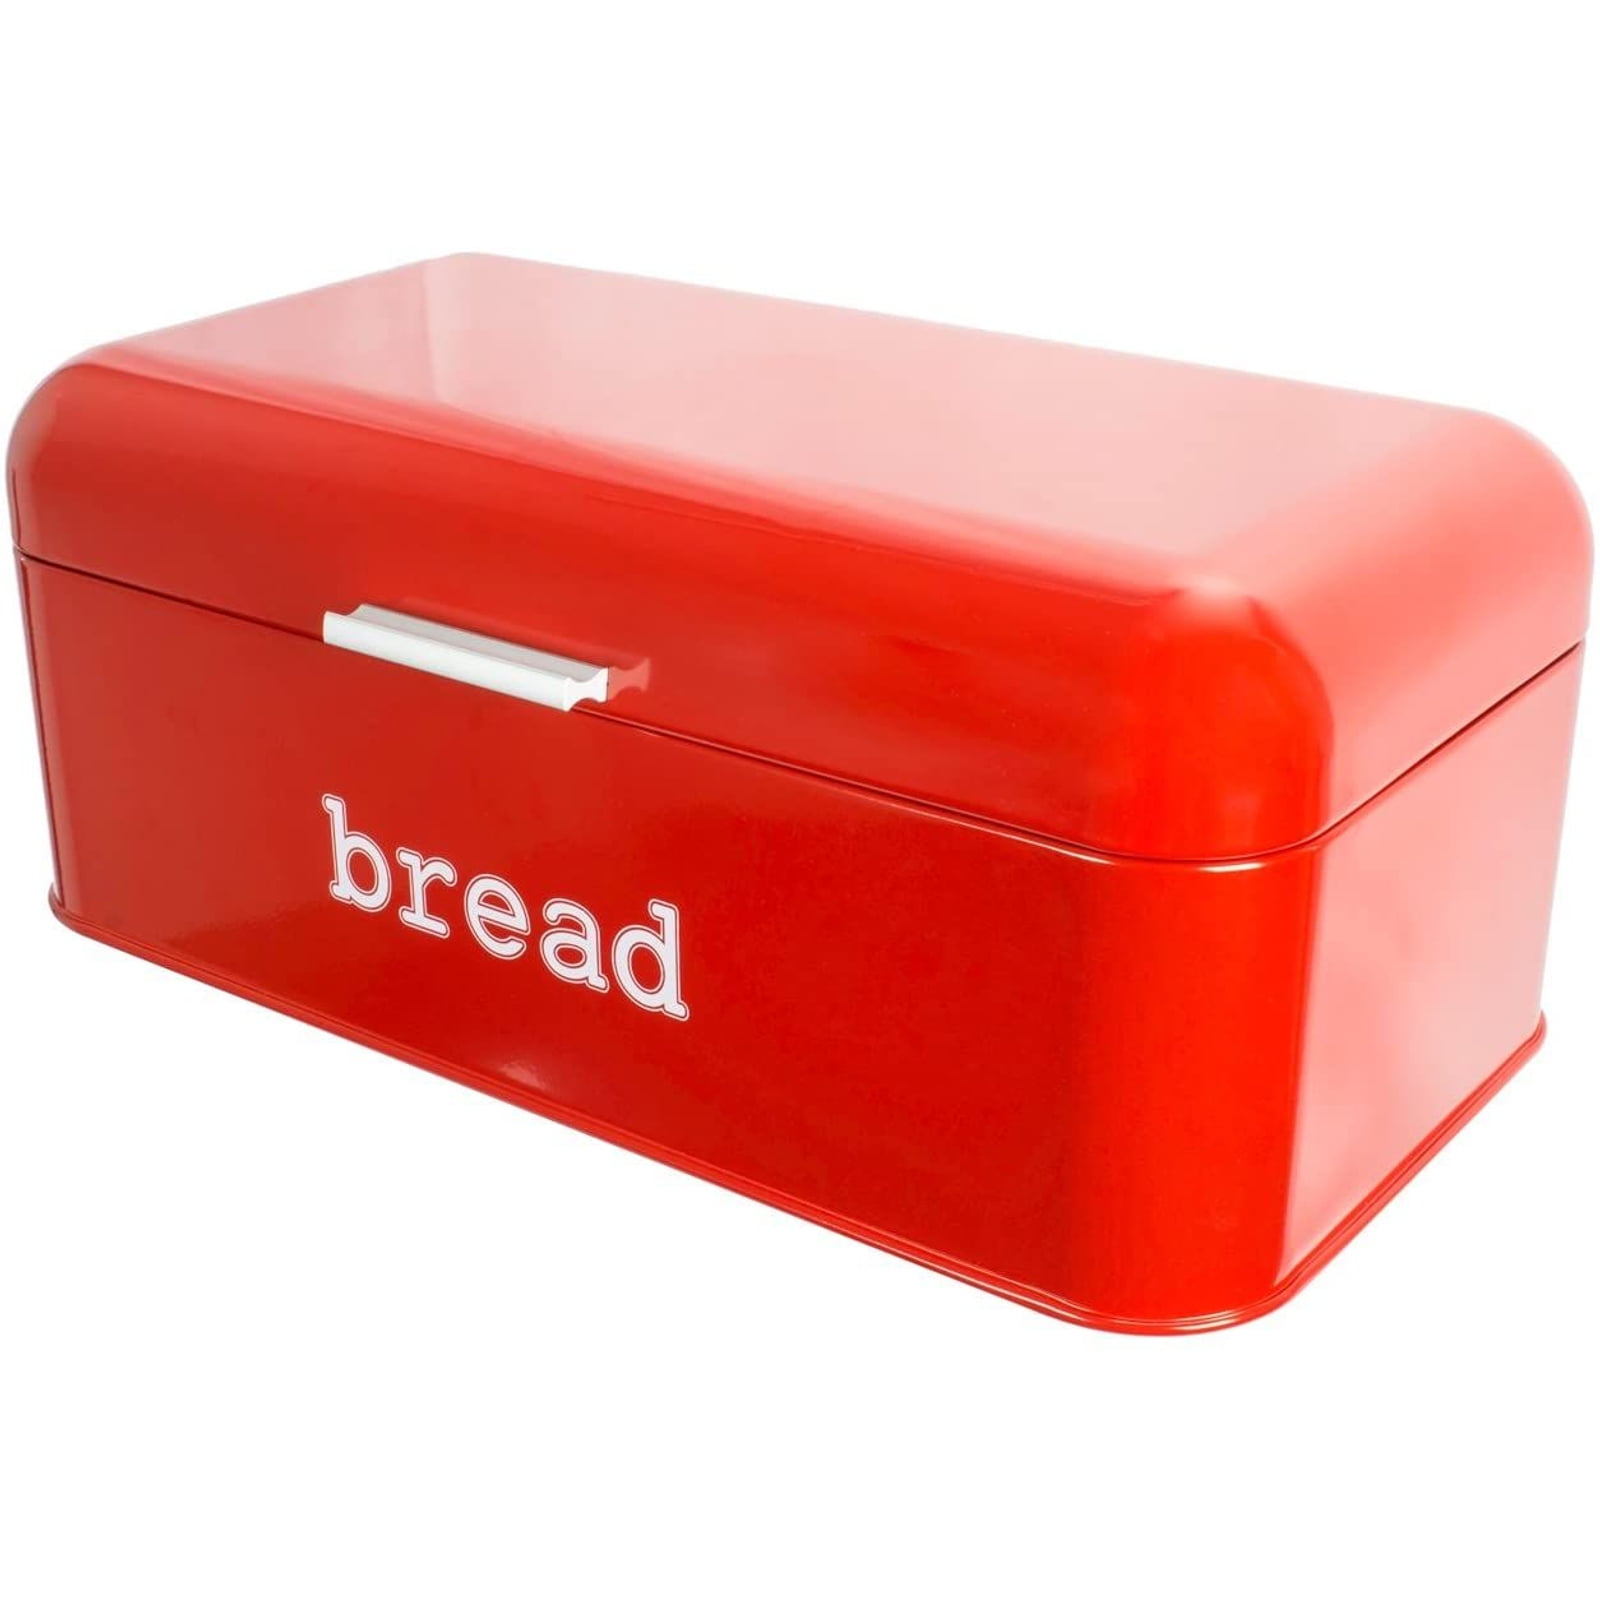 Metal Bread Box Bin Dessert Storage Container For Home Kitchen with Roll Top Lid 